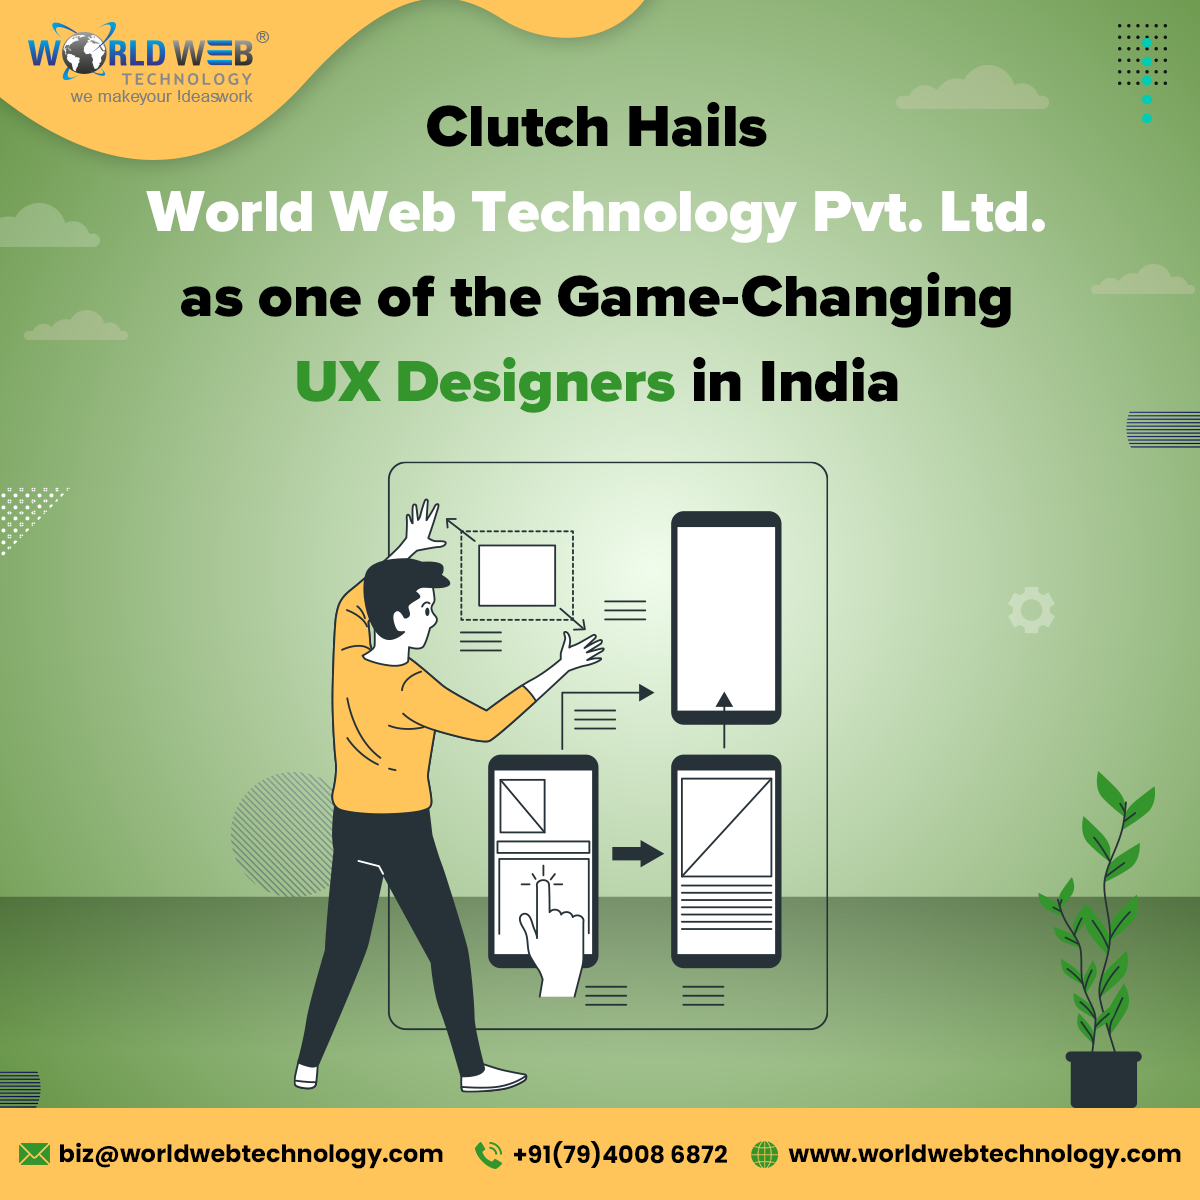 Clutch Hails World Web Technology Game-Changing UX Designers in India